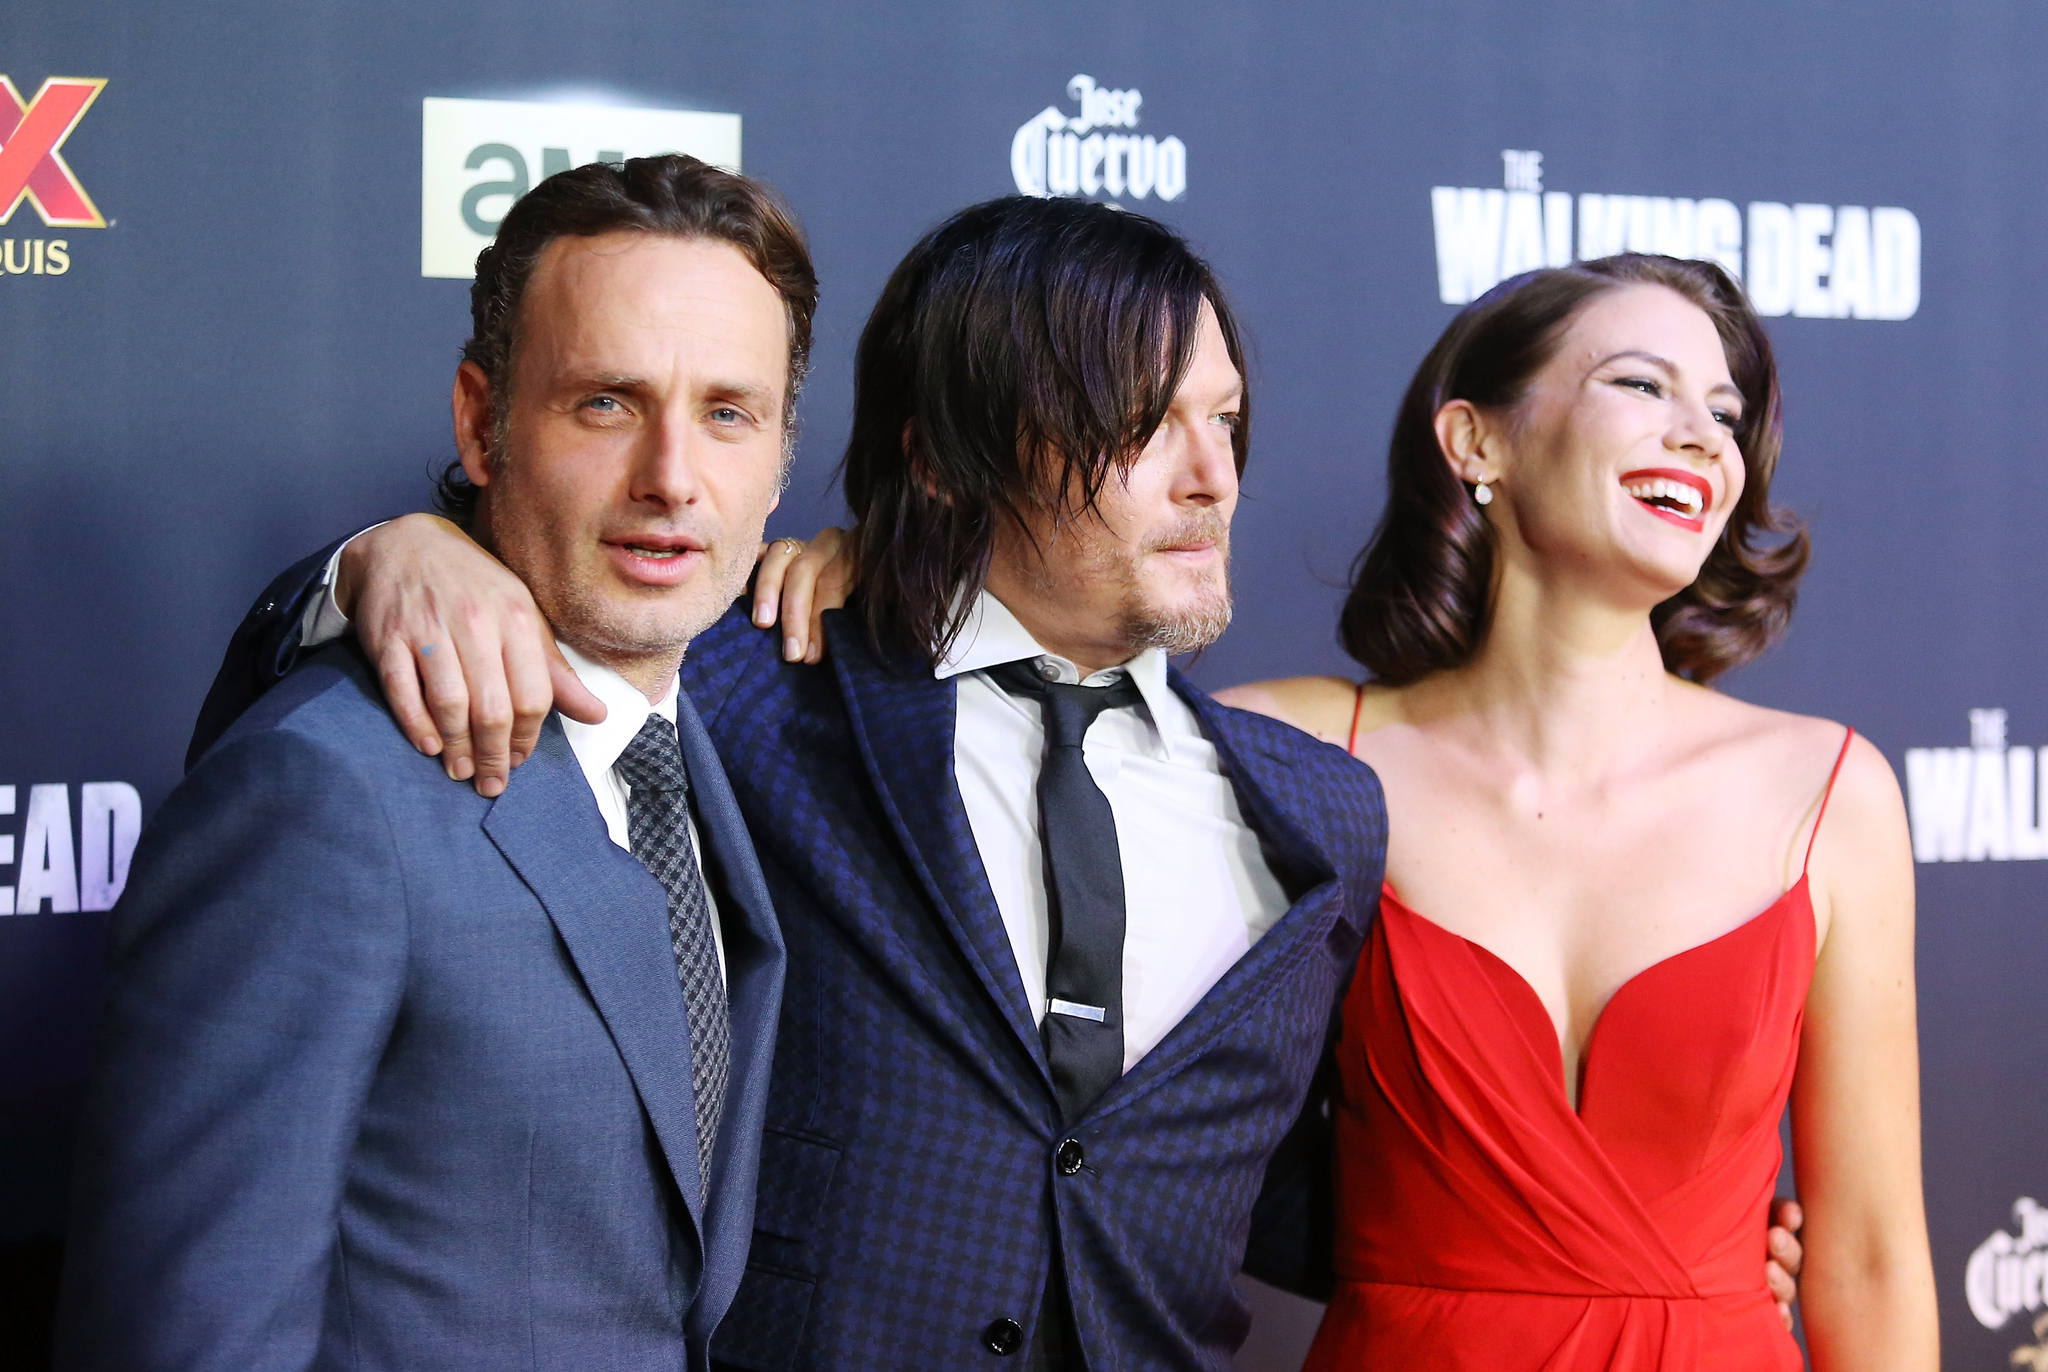 Norman Reedus, Andrew Lincoln and Lauren Cohan at event of Vaiksciojantys negyveliai (2010)